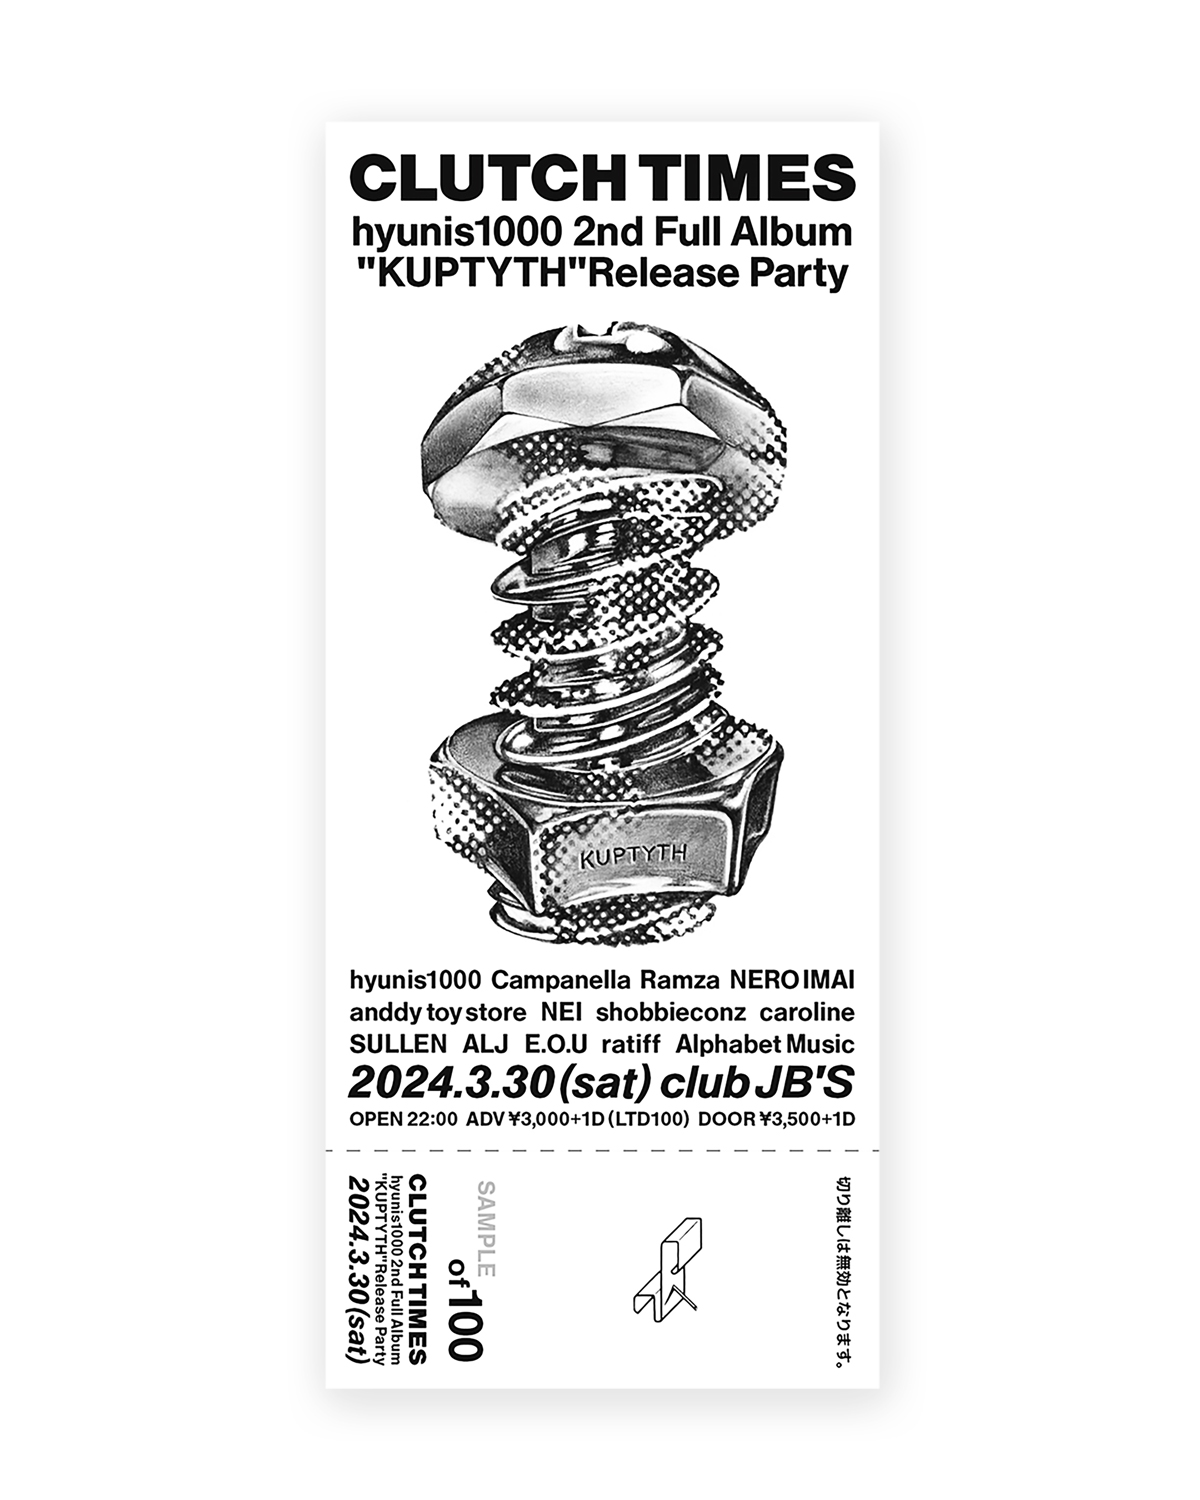 "CLUTCH TIMES" hyunis1000 2nd Full Album "KUPTYTH" Release Party | Ticket